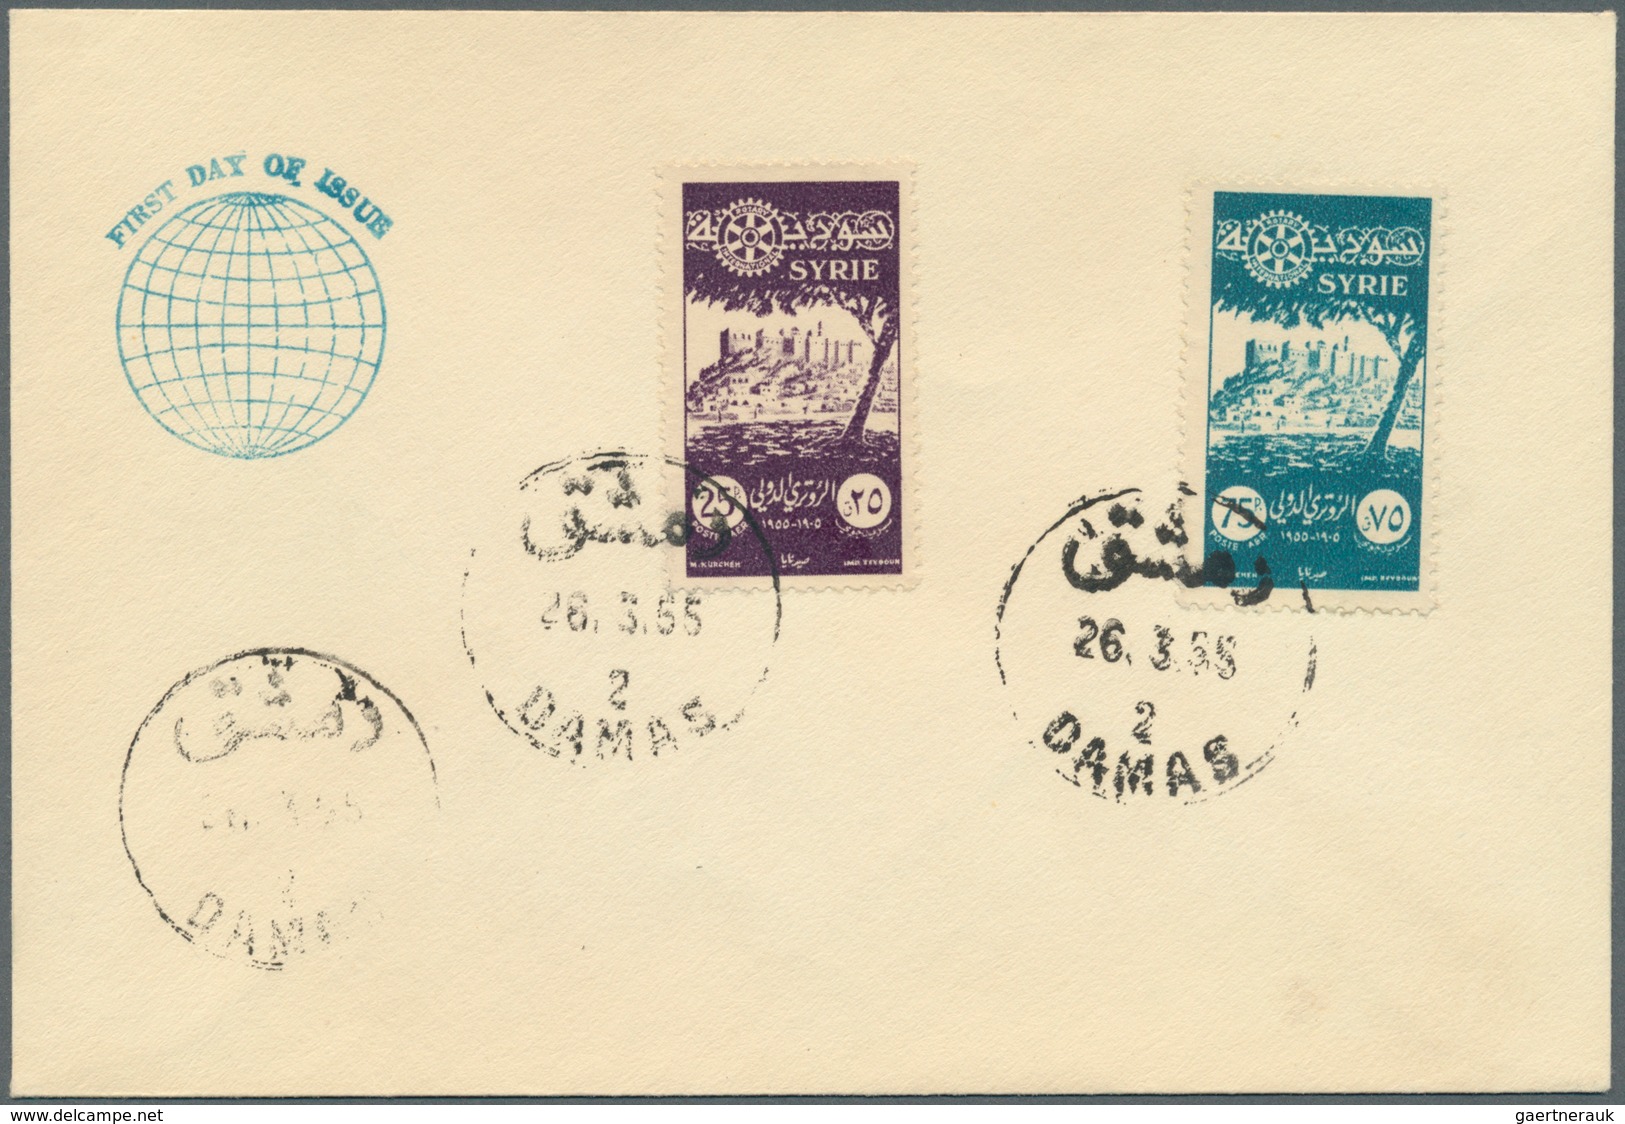 29596 Naher Osten: 1920/2000 (ca.), Near/Middle East, holding in three albums, comprising some Hejaz/Najd,